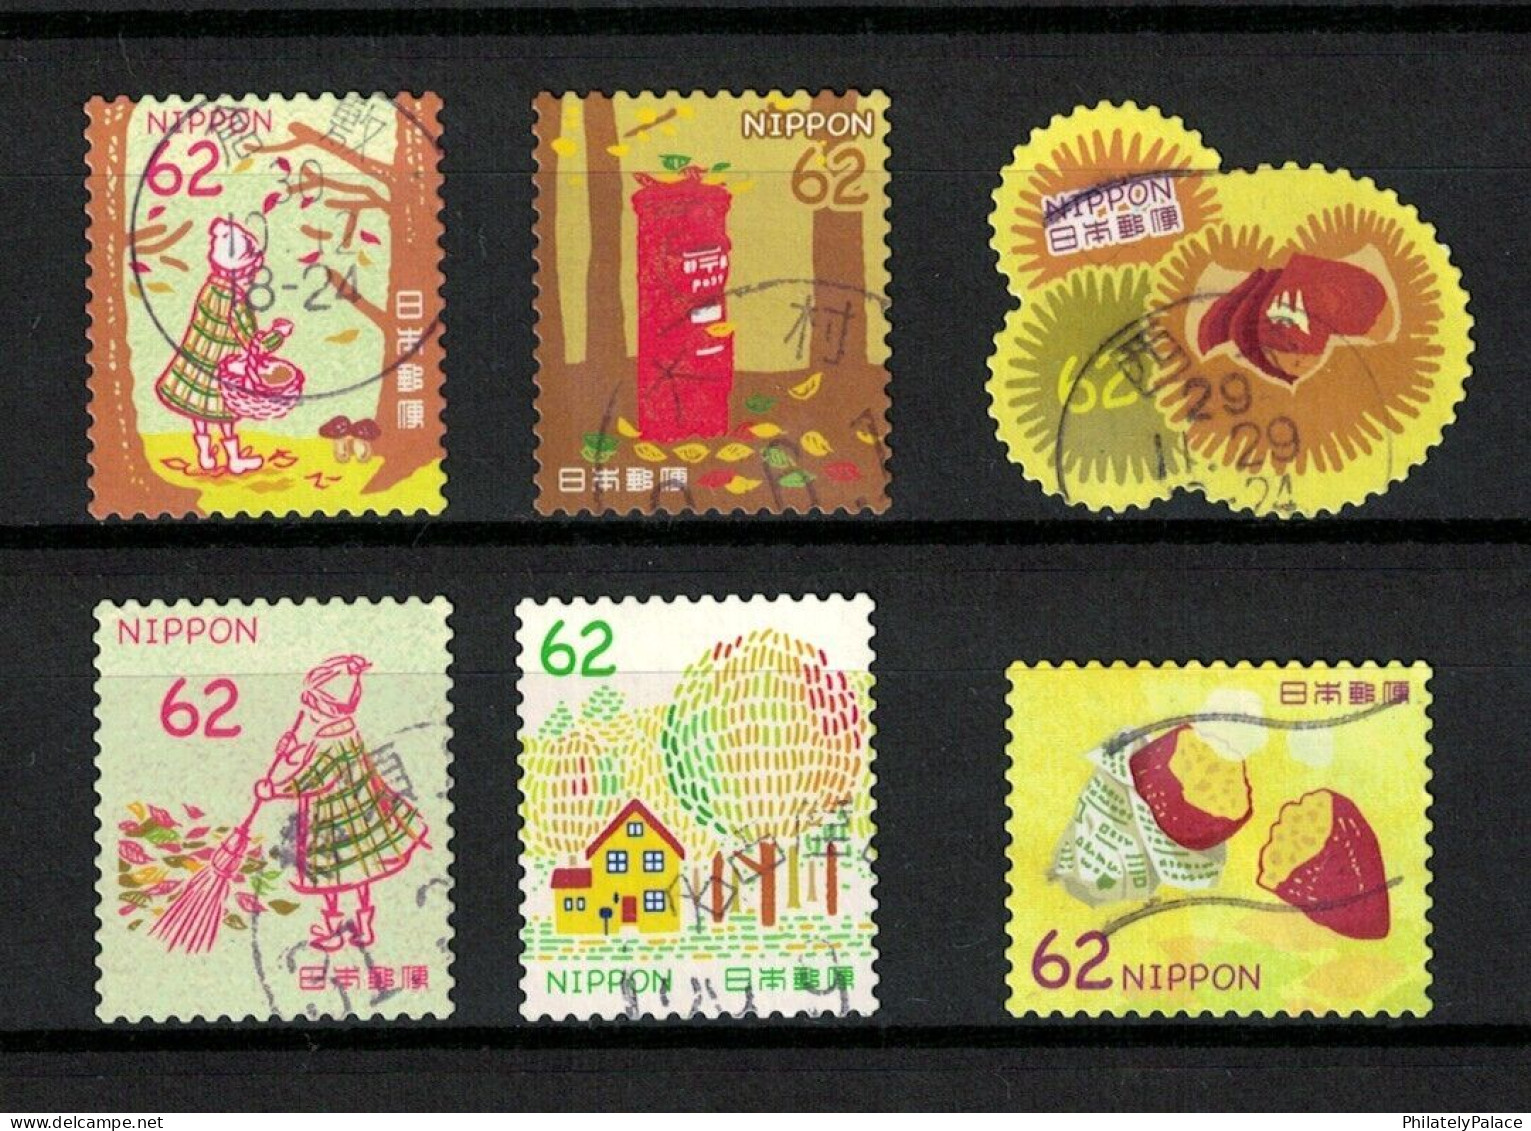 JAPAN 2017 GREETINGS AUTUMN 62 YEN, ODD SHAPED, POST BOX, SWEET POTATO,SET OF 6 STAMPS USED (**) - Used Stamps